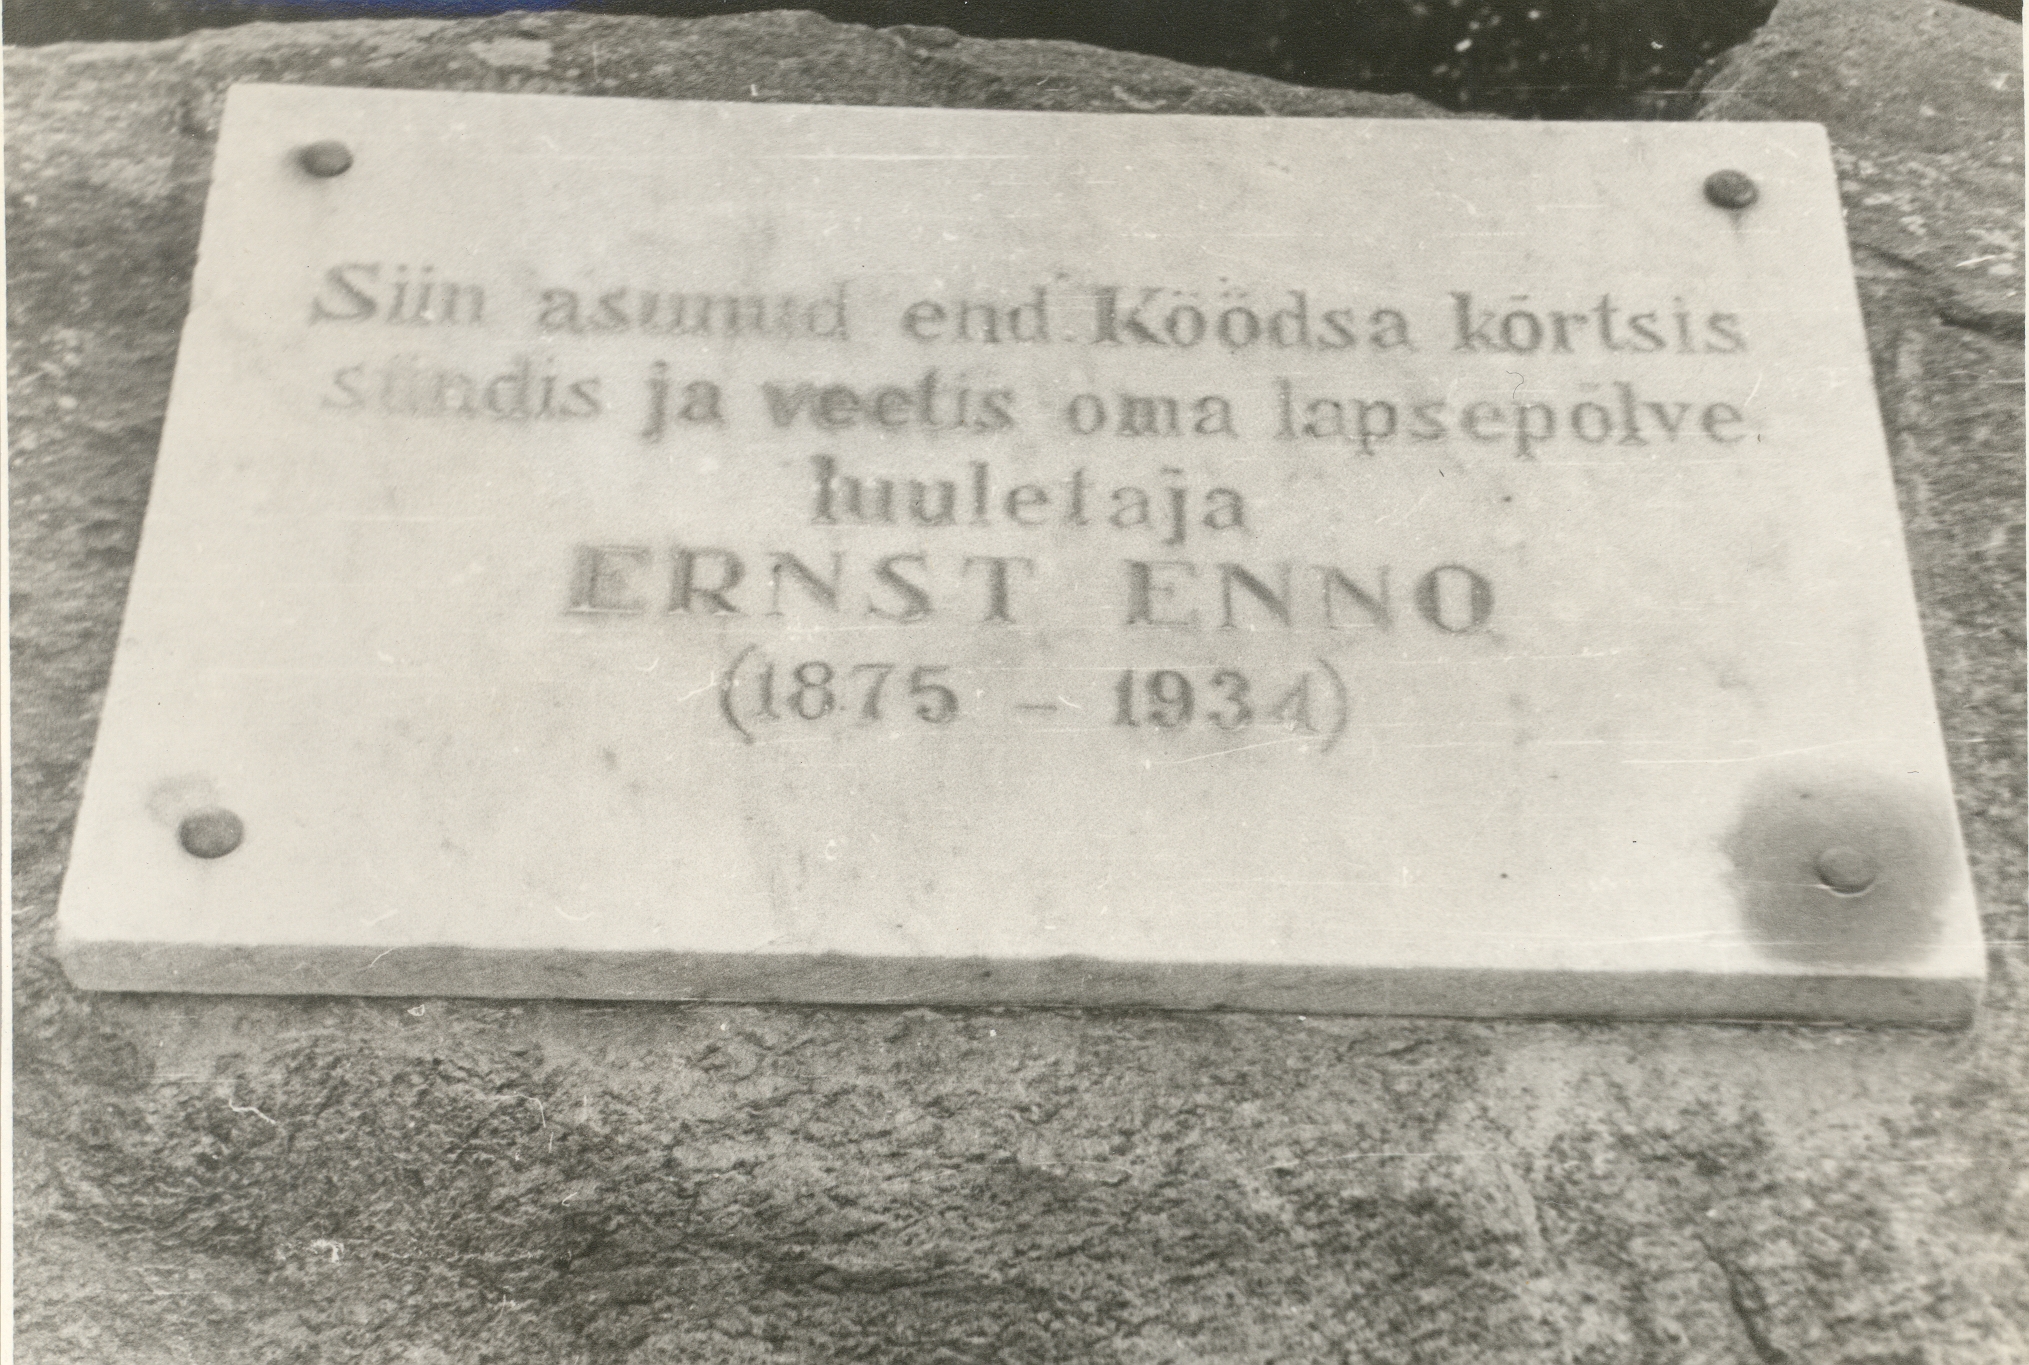 The plank Ernst Enno was born in the memorial stone of the birthplace in Light. 1965 a.